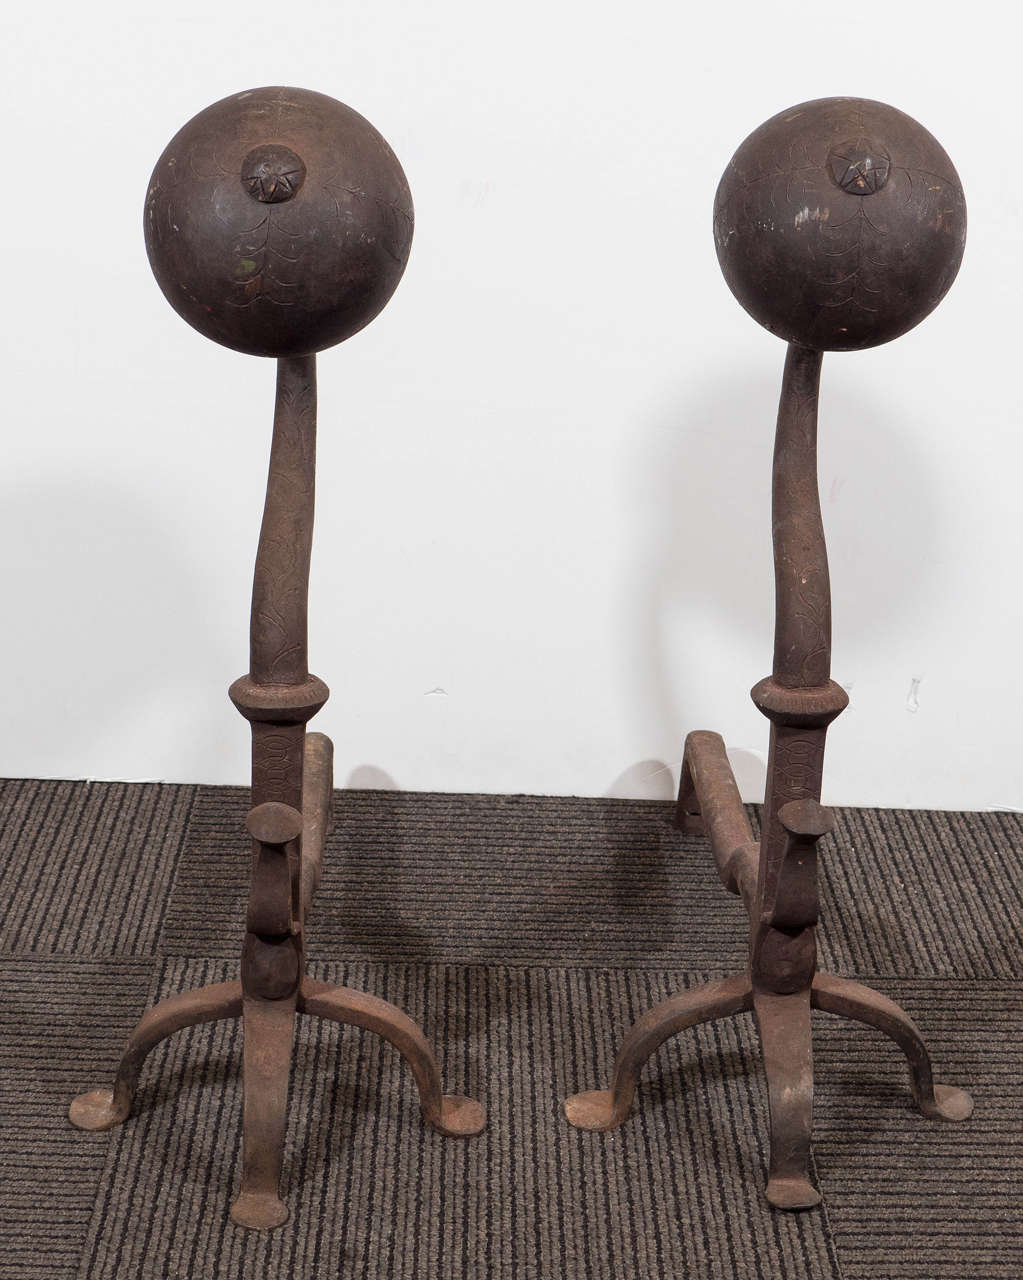 A unique pair of early 19th century antique andirons, possibly American in origin, in cast iron, surface etched with stylistic details, with ball-form heads above 'gooseneck' stems, on arched legs and penny feet. Good vintage condition with age